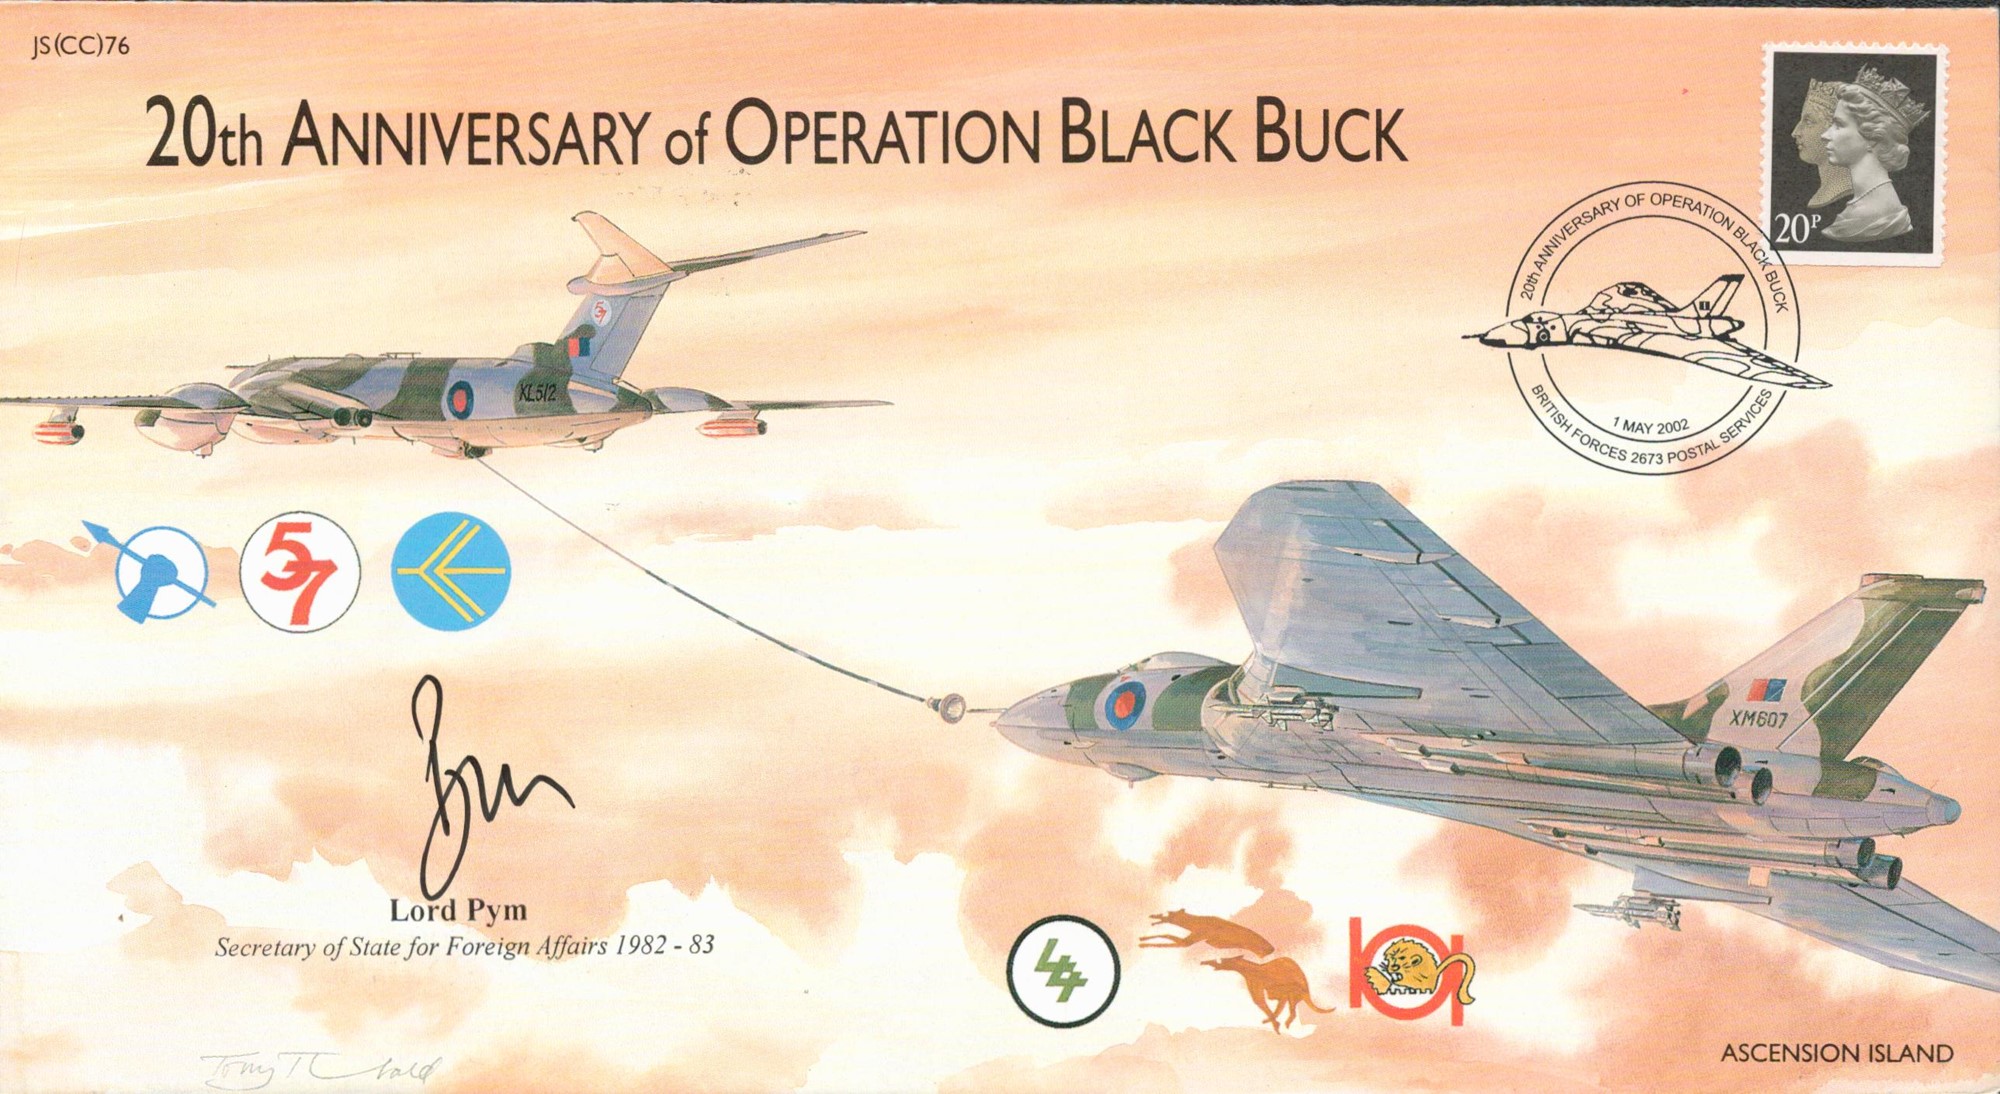 Lord Pym Signed 20th Anniversary of Operation Black Buck Flown First Day Cover. 20p British Stamp